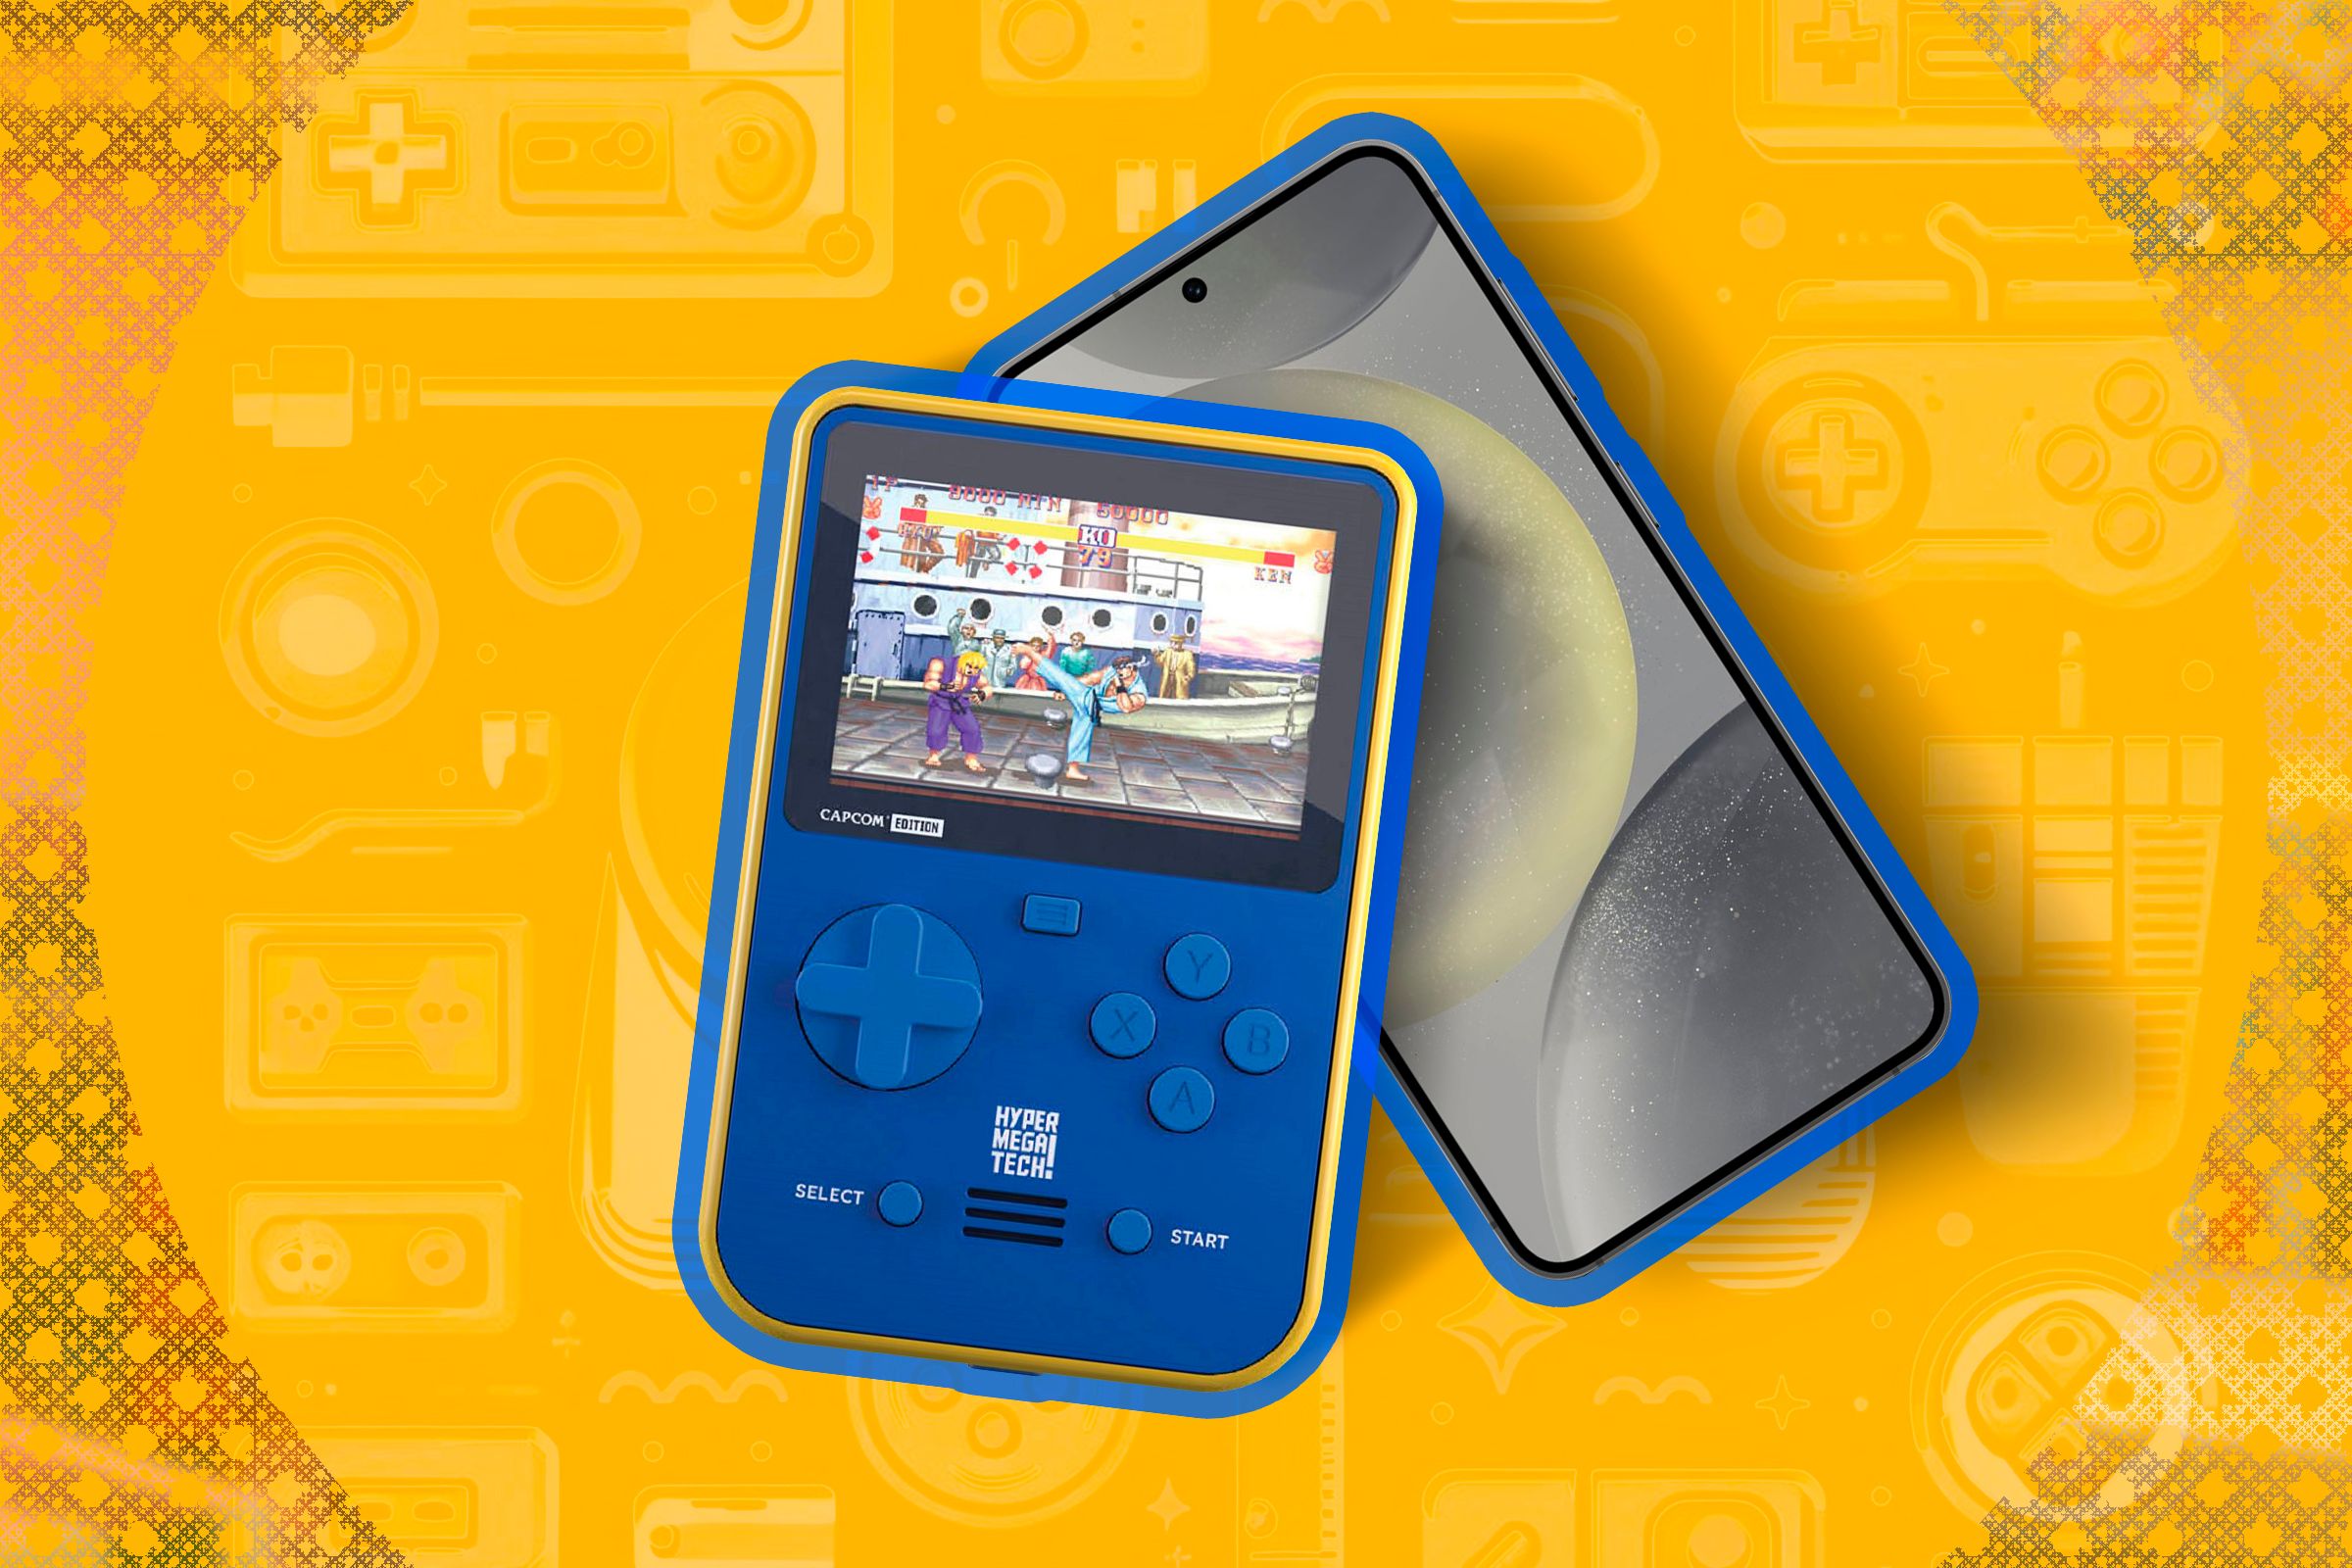 A retro handheld gaming device with a phone below it.